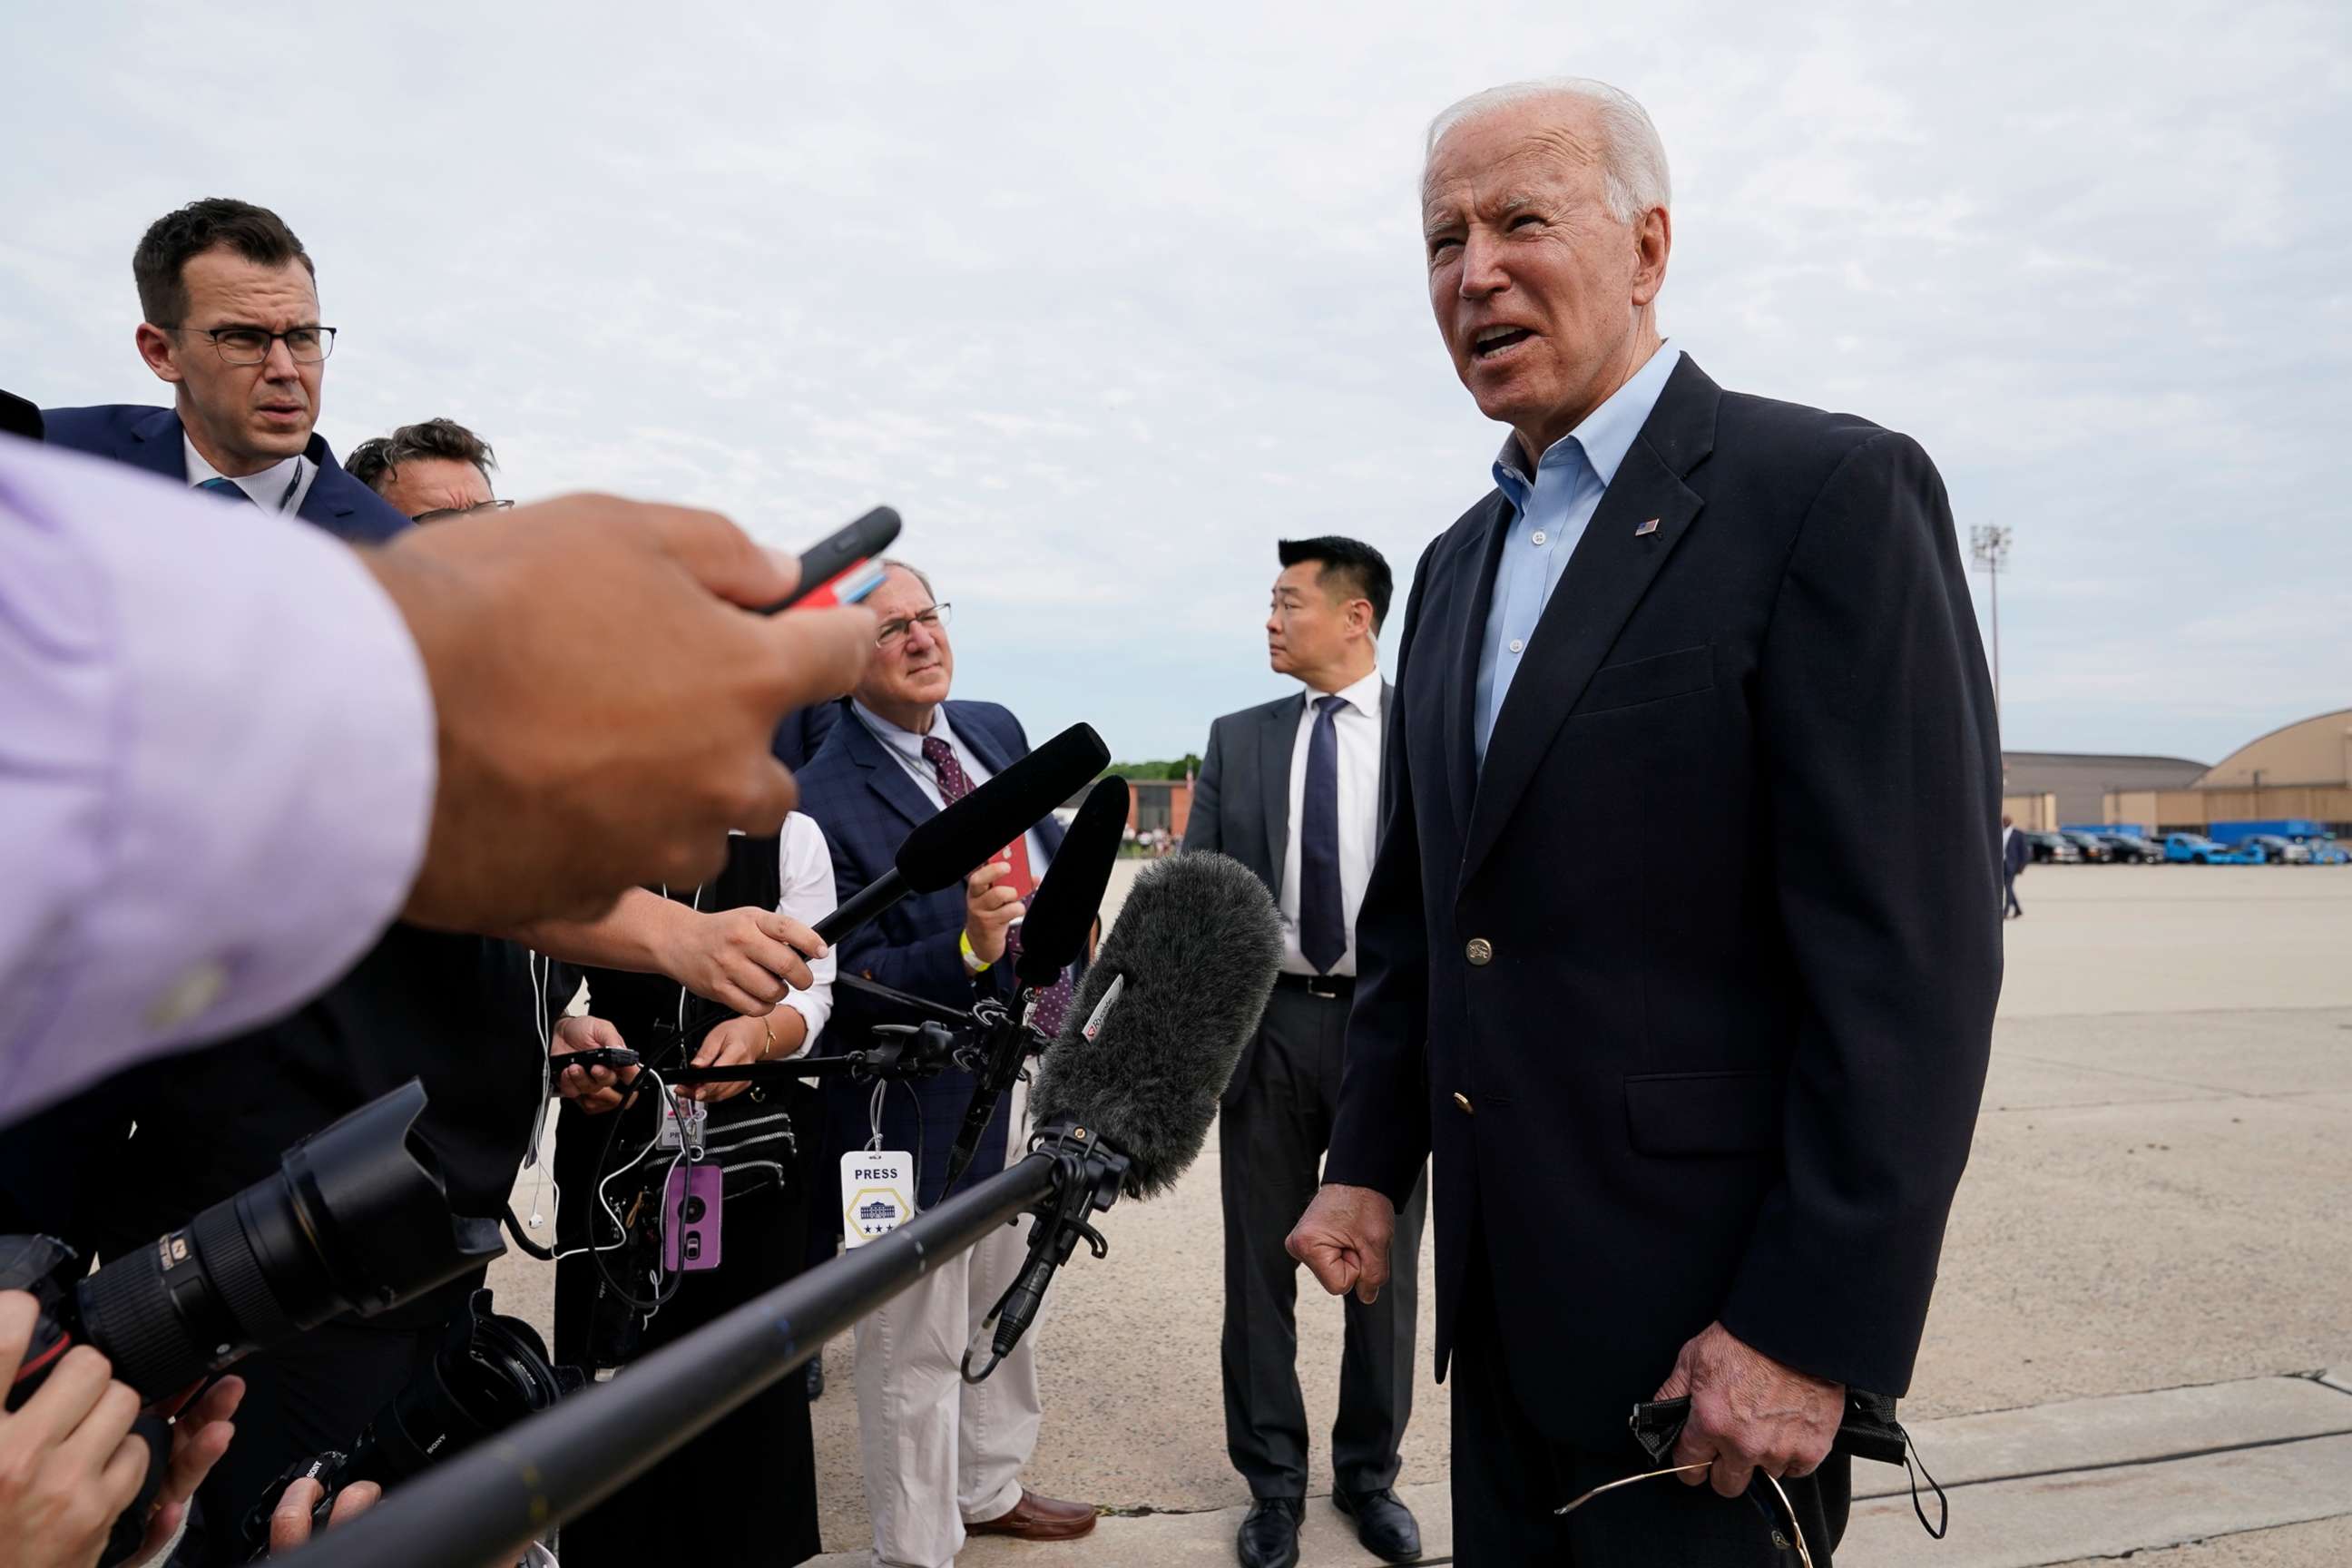 PHOTO: President Joe Biden speaks with reporters before boarding Air Force One, June 9, 2021, at Andrews Air Force Base, Md.